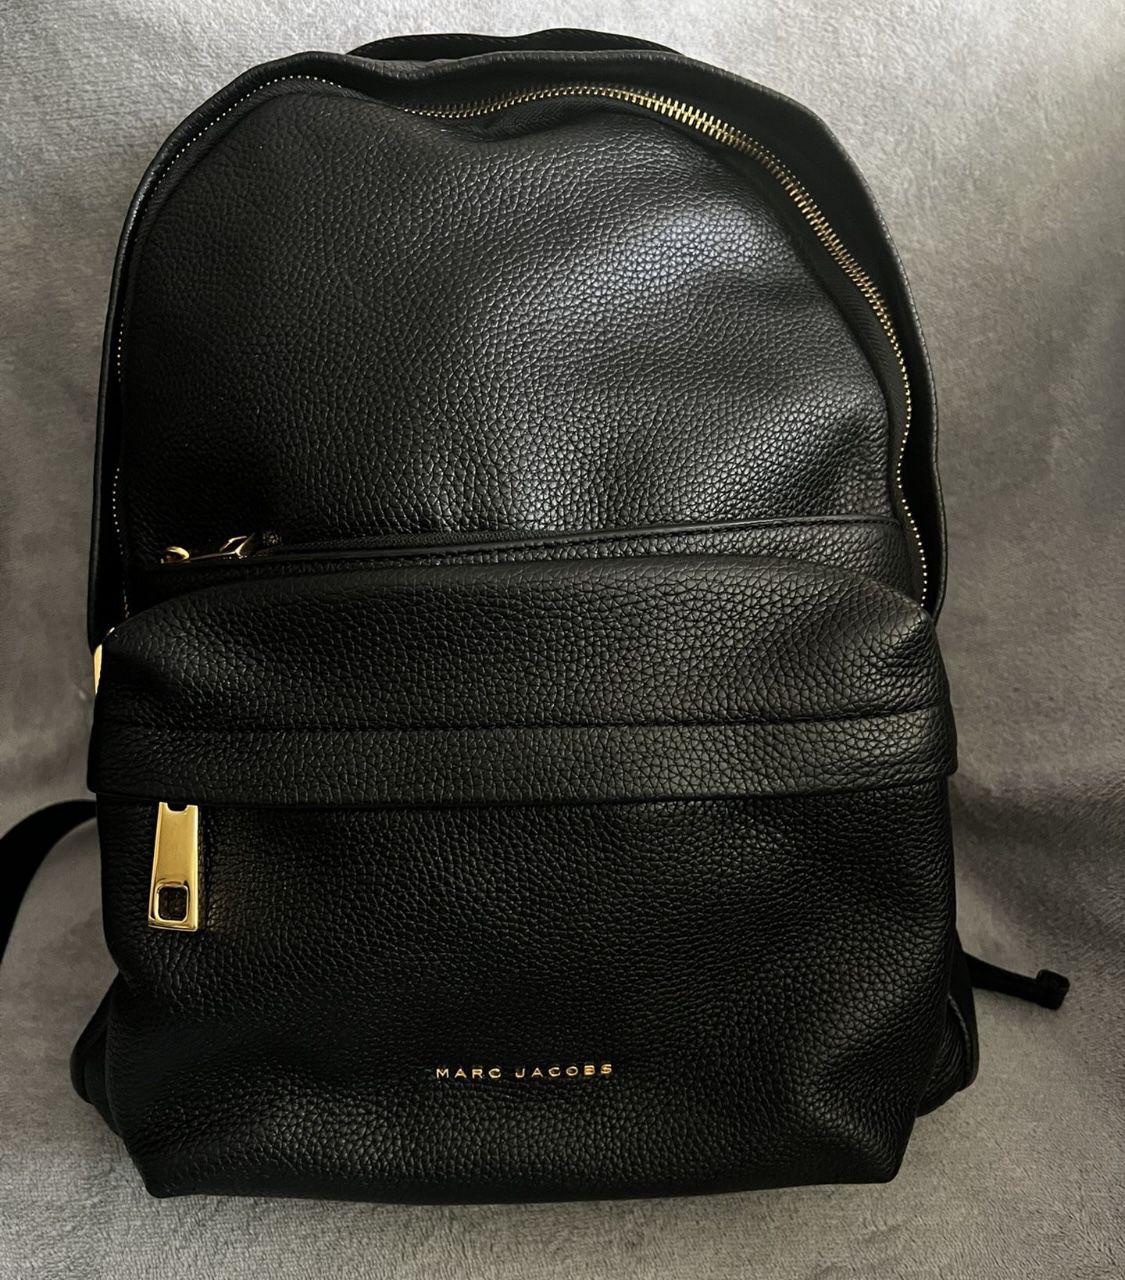 Gucci Bag for Sale in Renton, WA - OfferUp